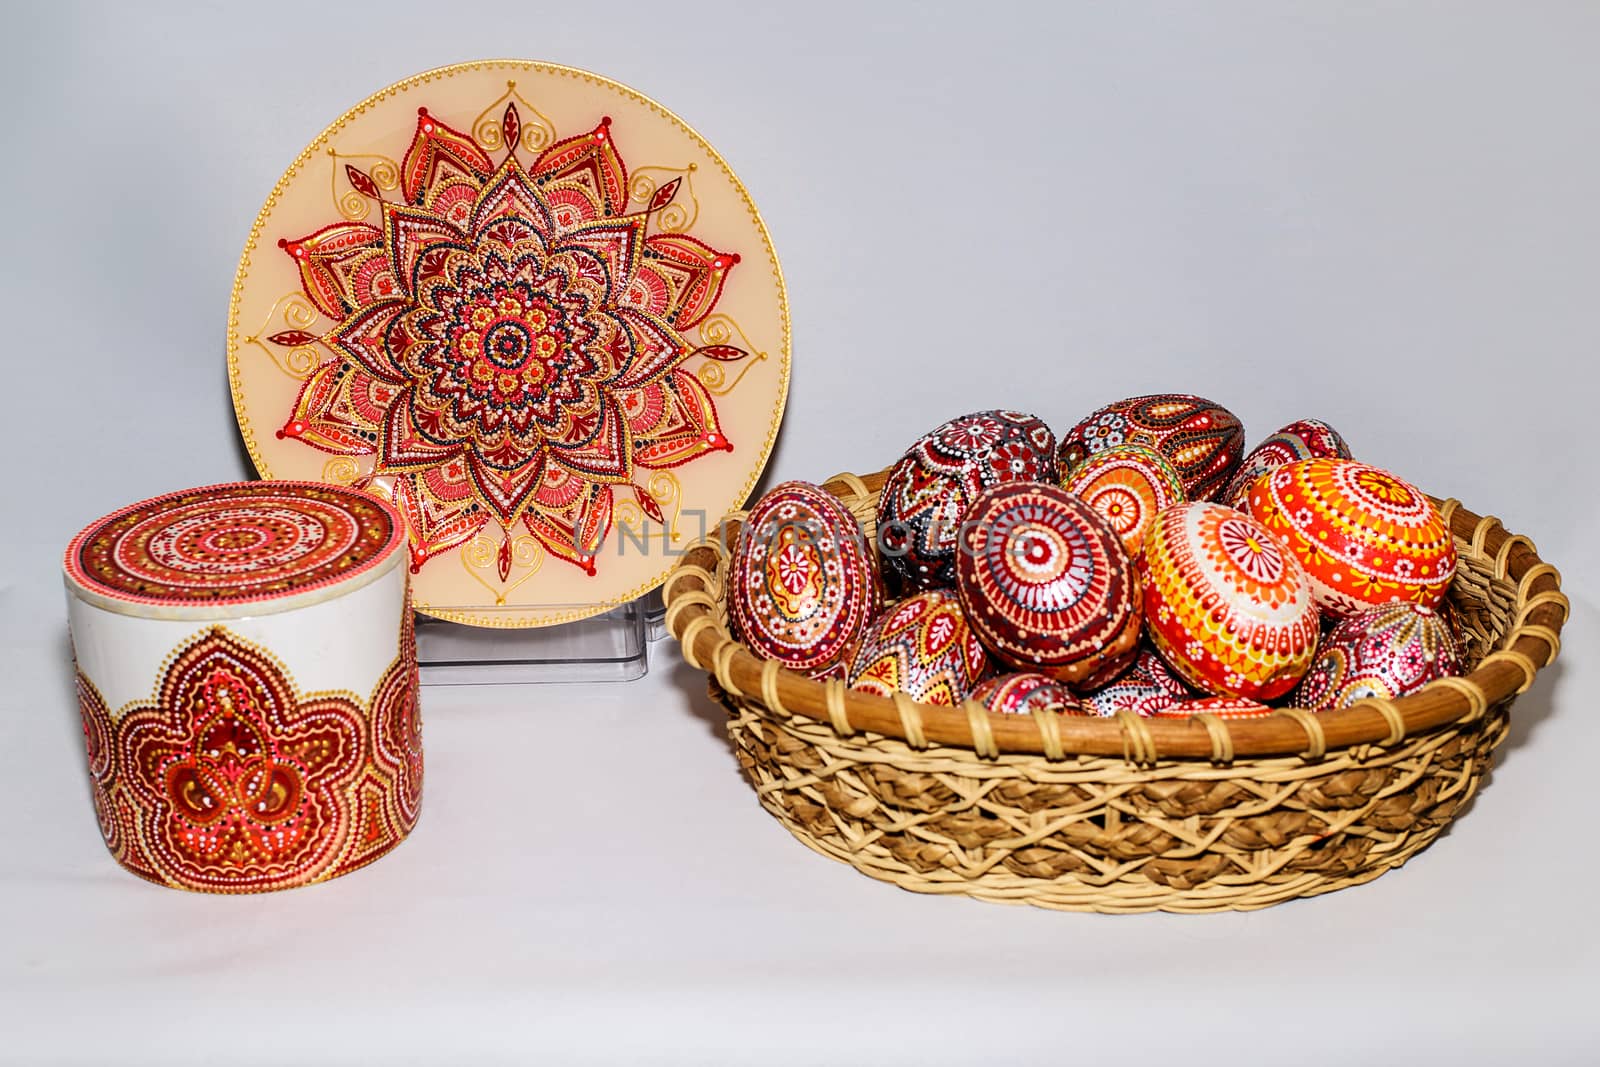 Easter eggs, hand-painted with acrylic paints.